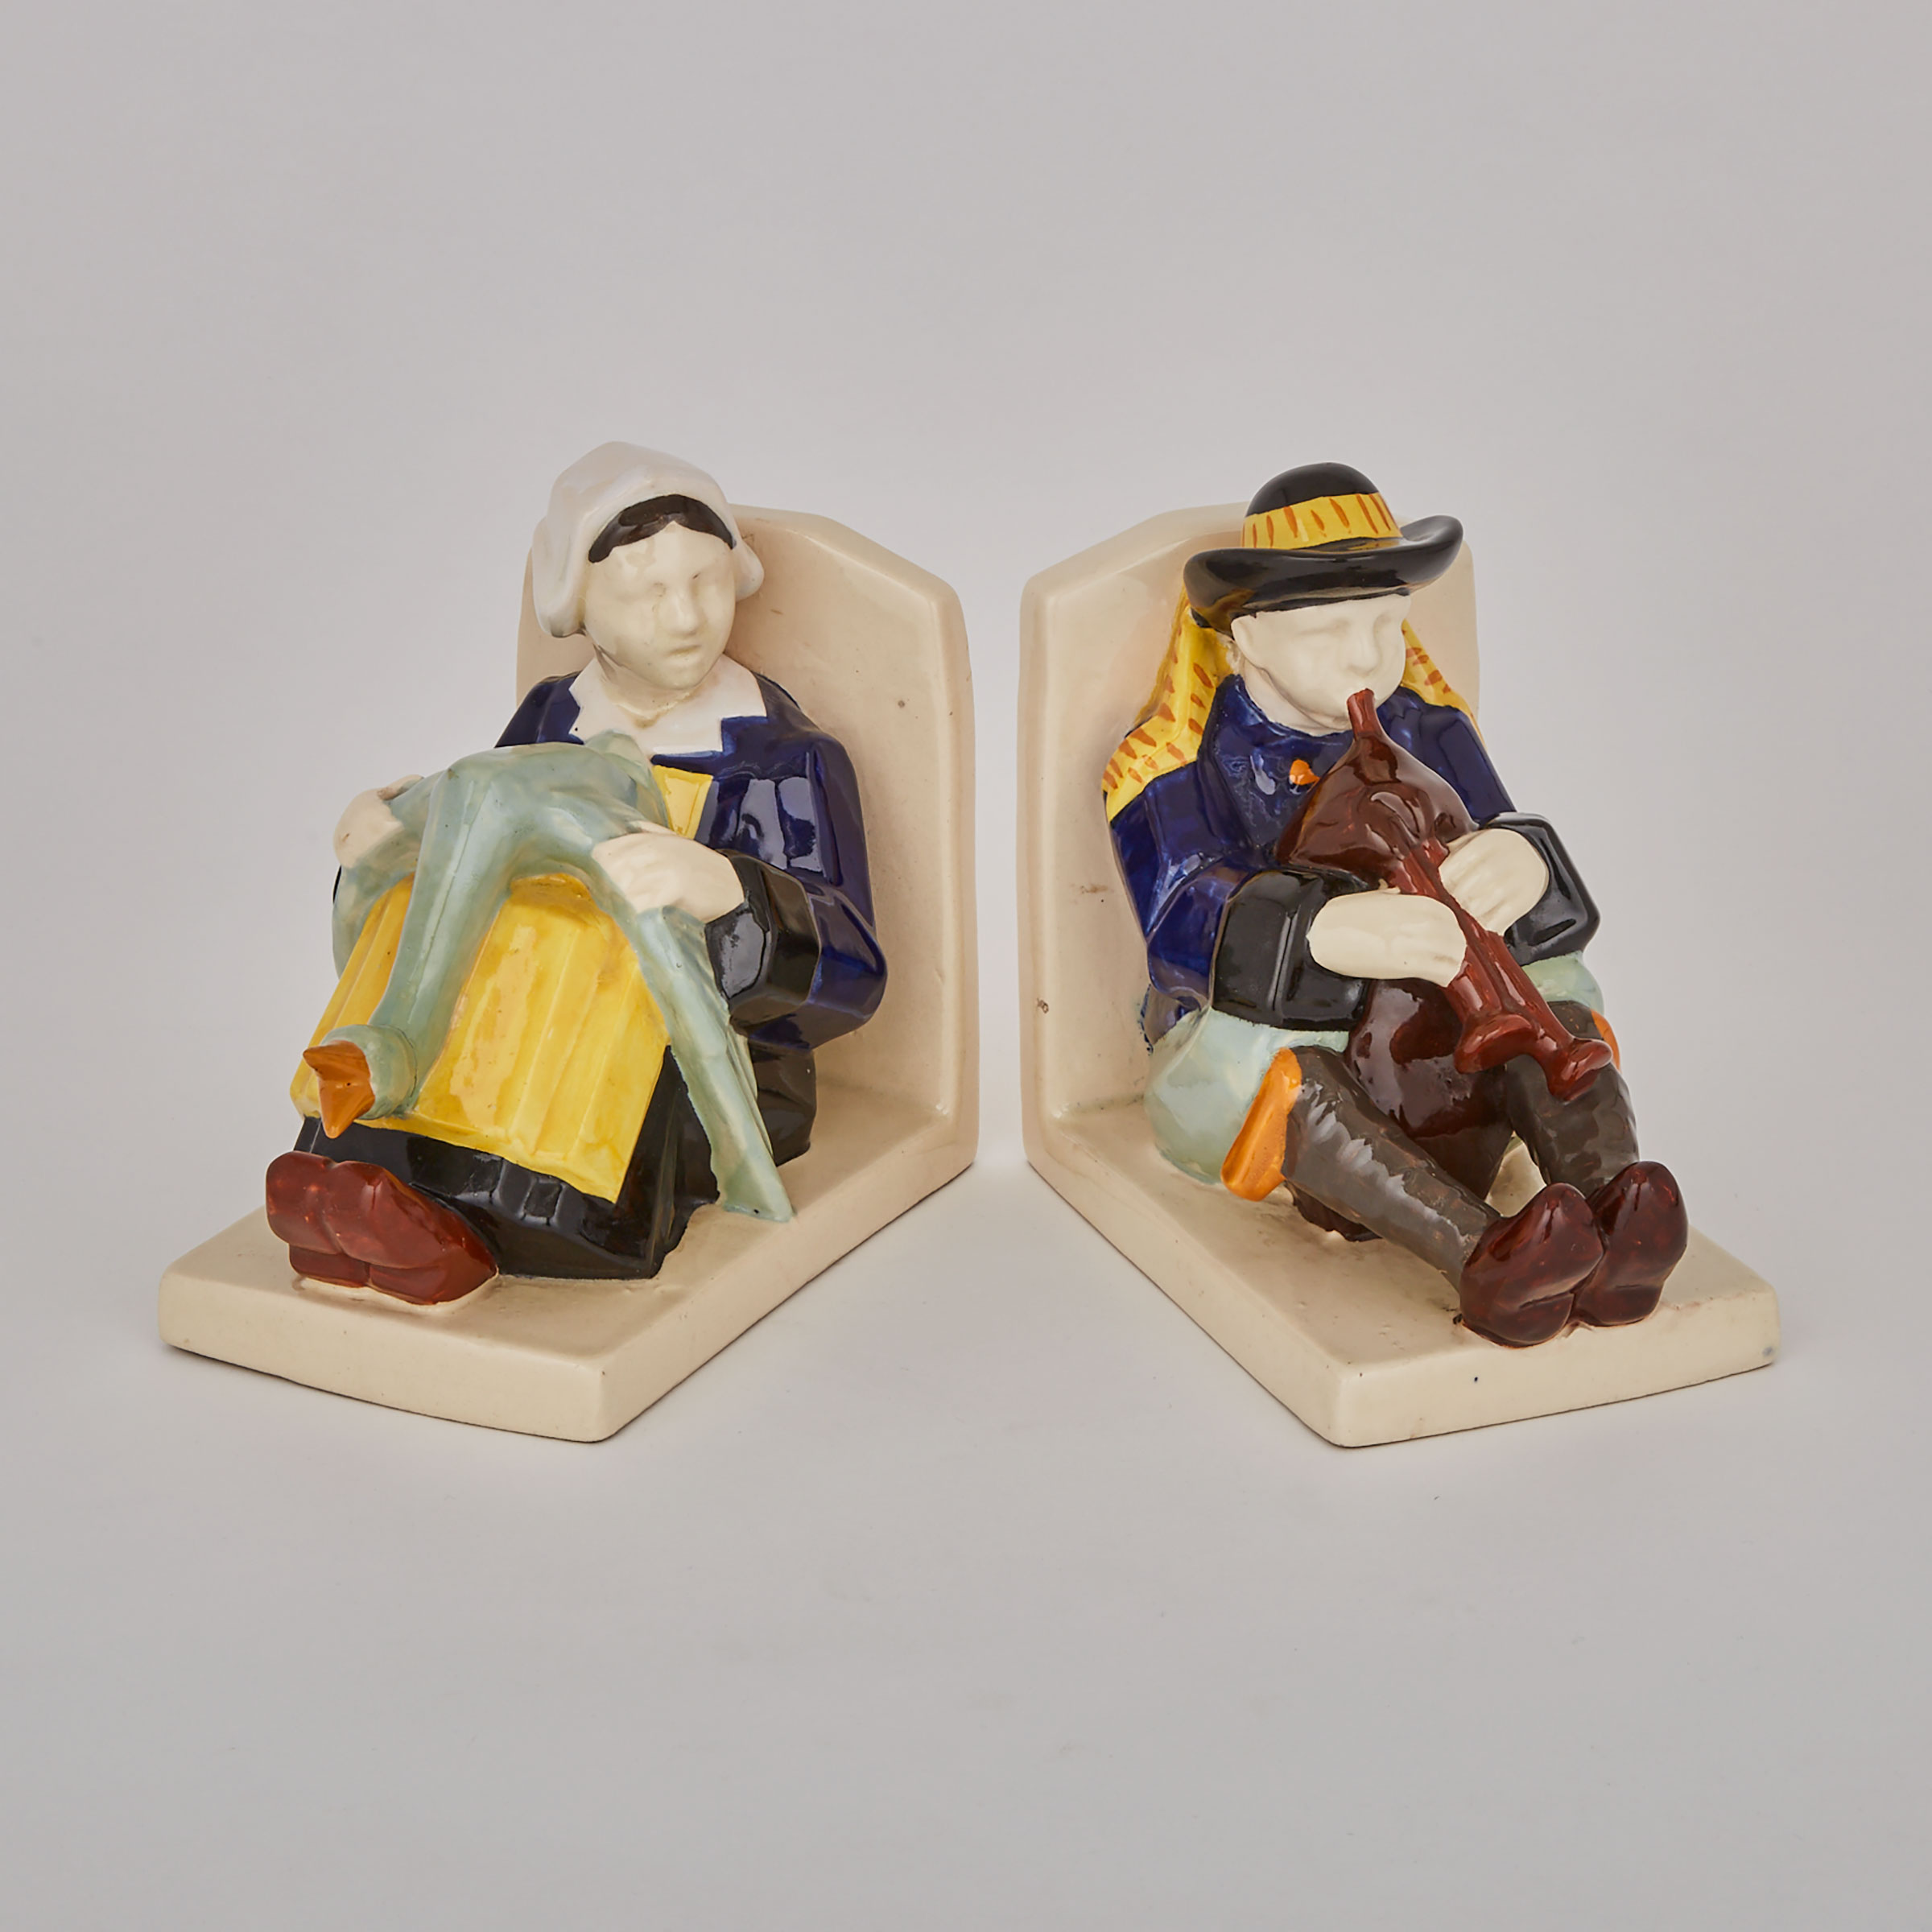 Pair of Quimper Bookends, Two Berthe Savigny Figures and Two Miniature Jim Eugène Sevellec Figure Groups, early 20th century